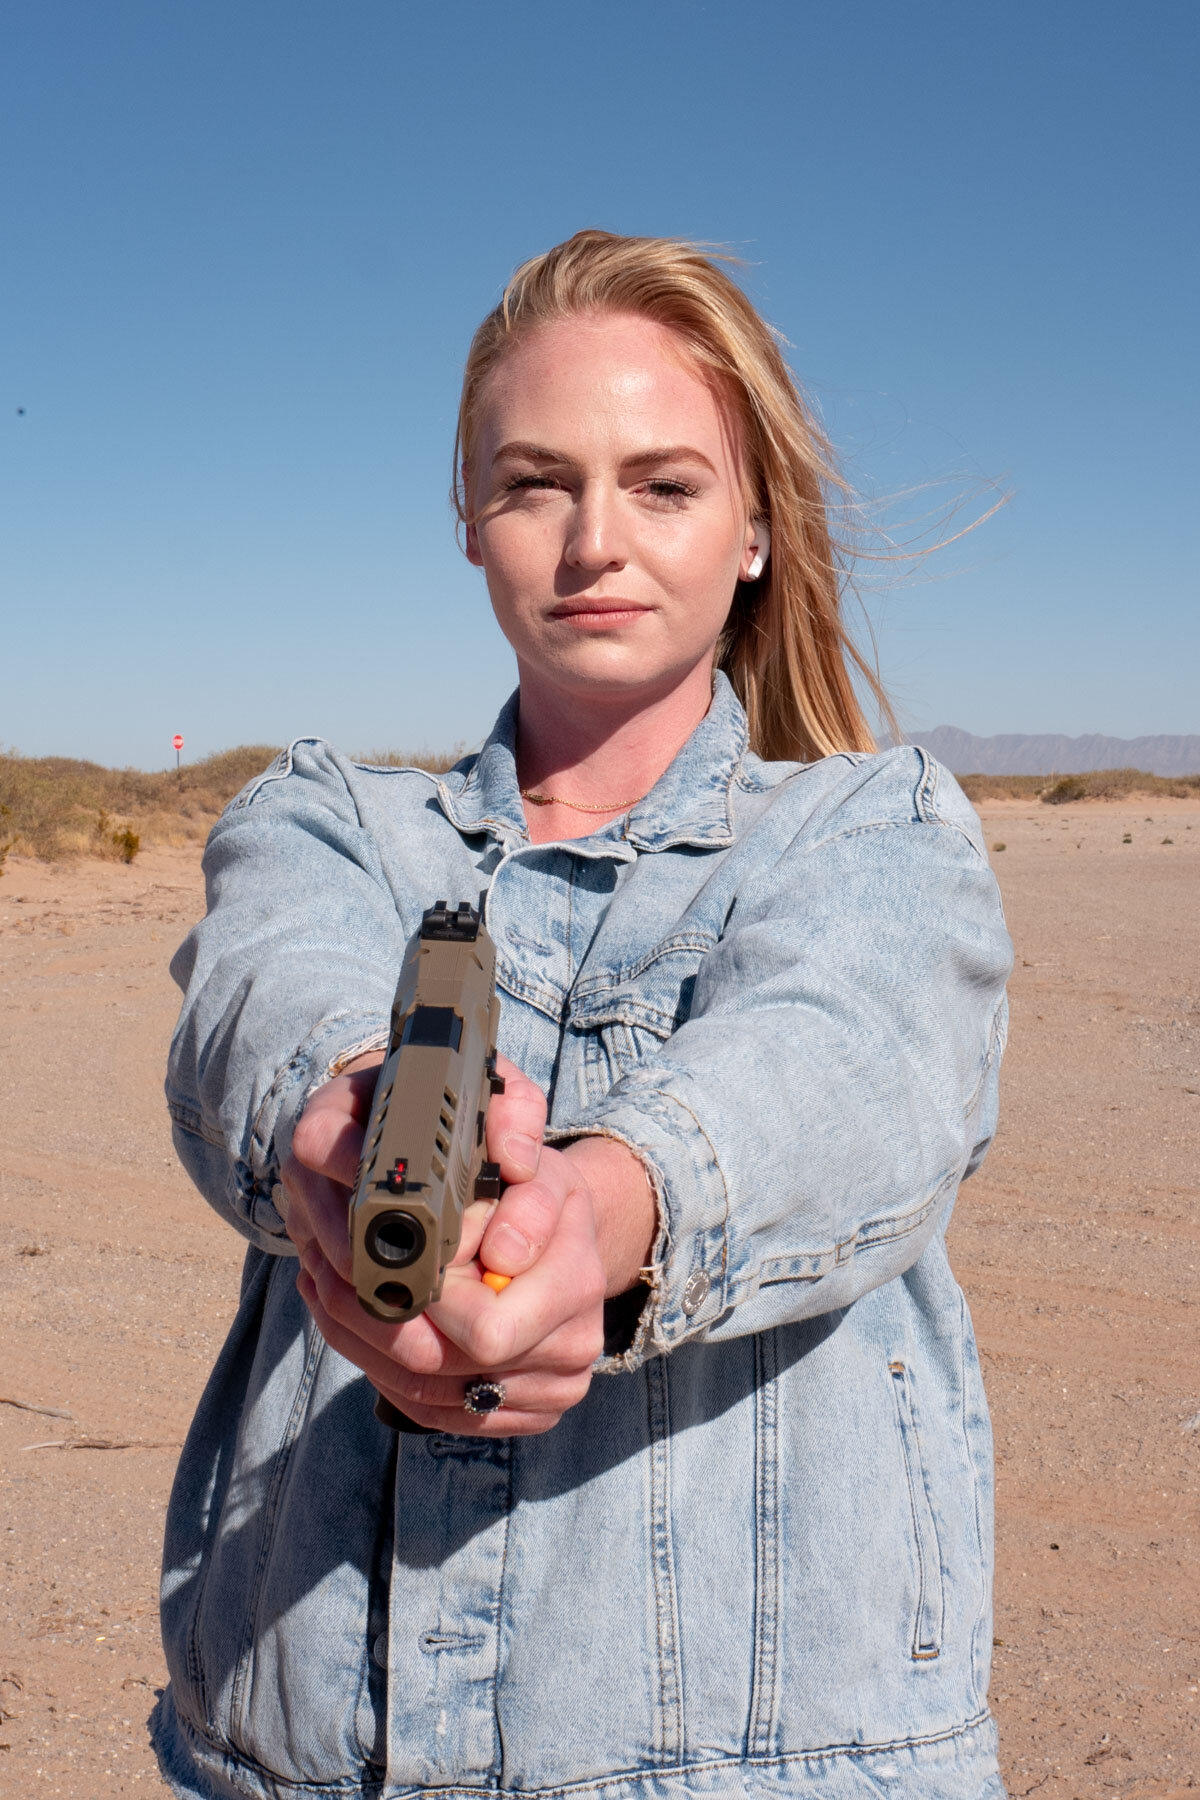  December 1st  2020.Katherine Leary at the Mexican border shooting in the spot her father used to take her to learn how to use her firearms. She decided to go out to train this morning in fear of unrest following the US election. Following high rates